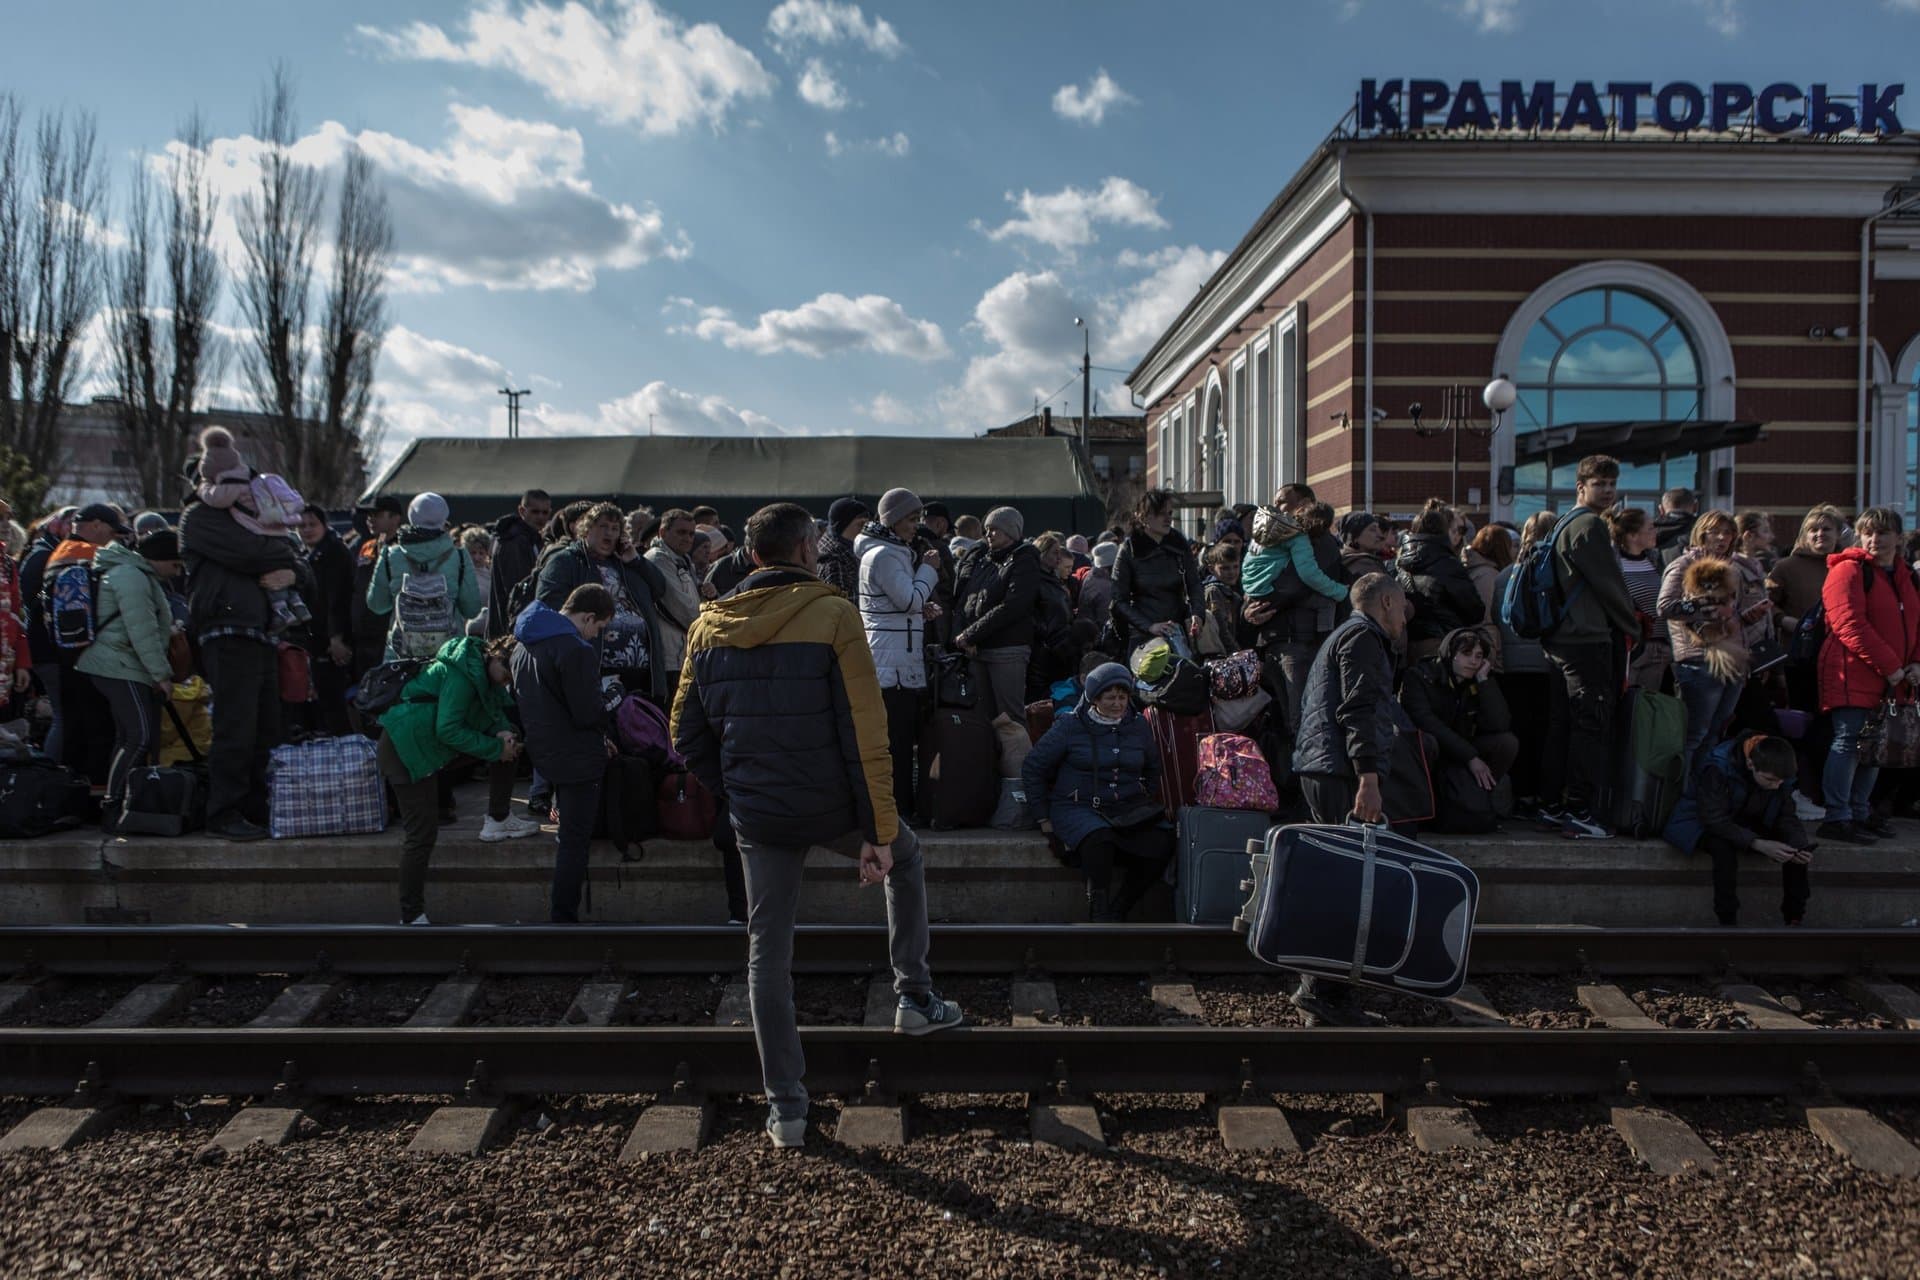 Civilians waiting for trains in the railway station in Kramatorsk